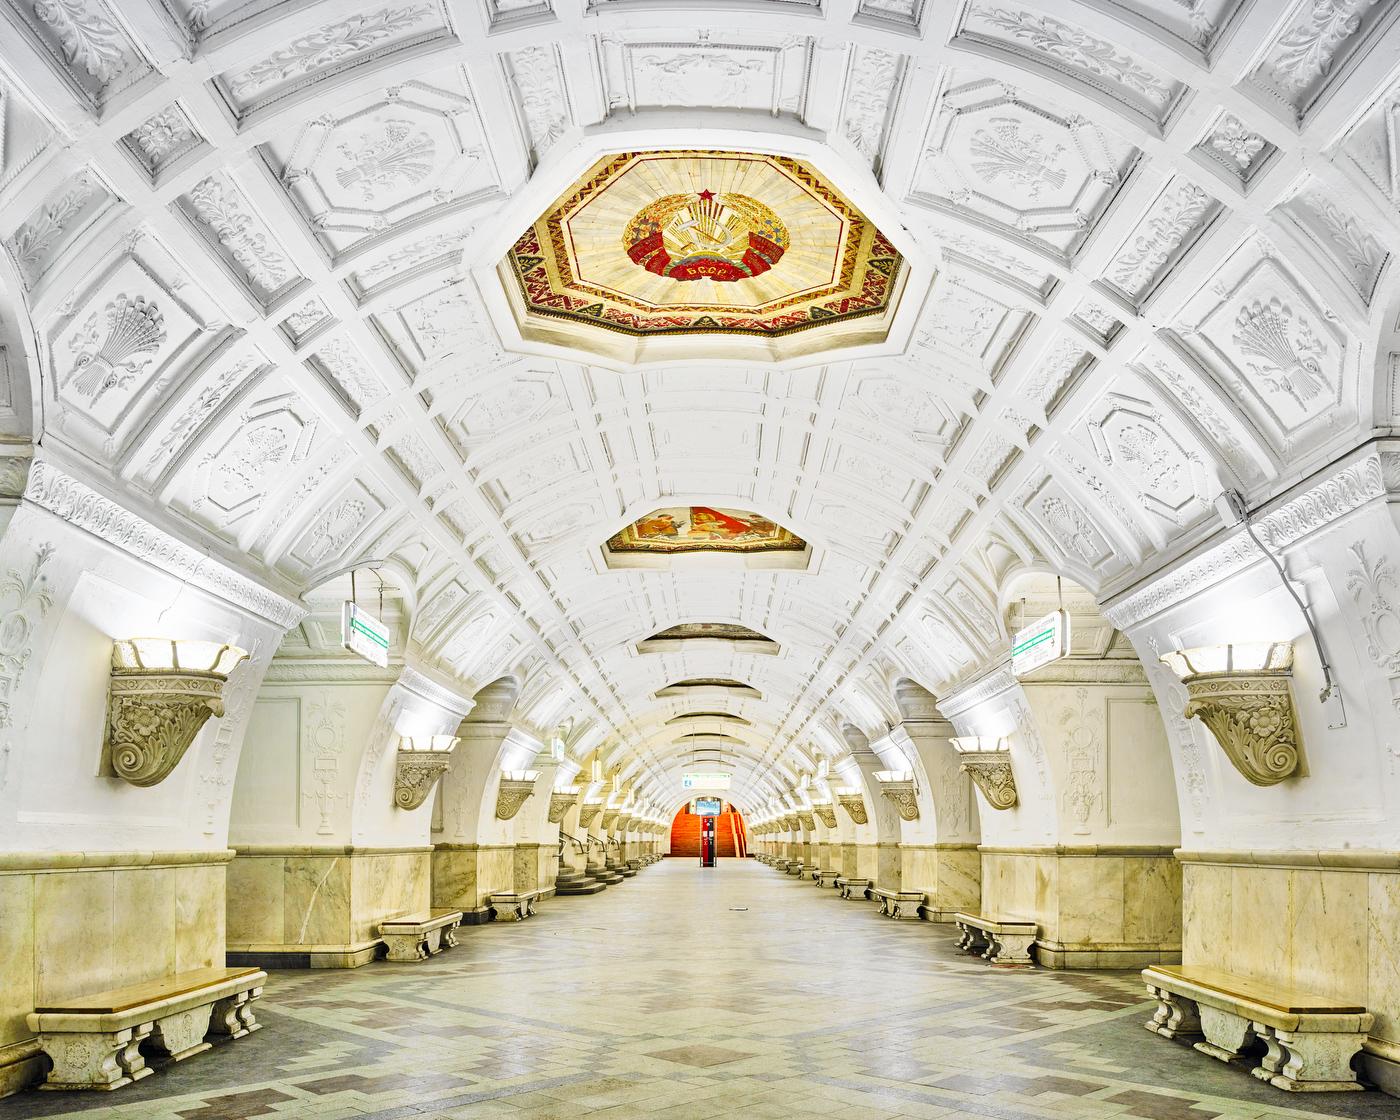 All available sizes & editions for each size of this photograph:
21” x 26" Edition of 7
32” x 40" Edition of 7
44” x 55” Edition of 10
59” x 73.5” Edition of 5

Burdeny’s Russia images, particularly in his photographs of the Moscow Metro, in which